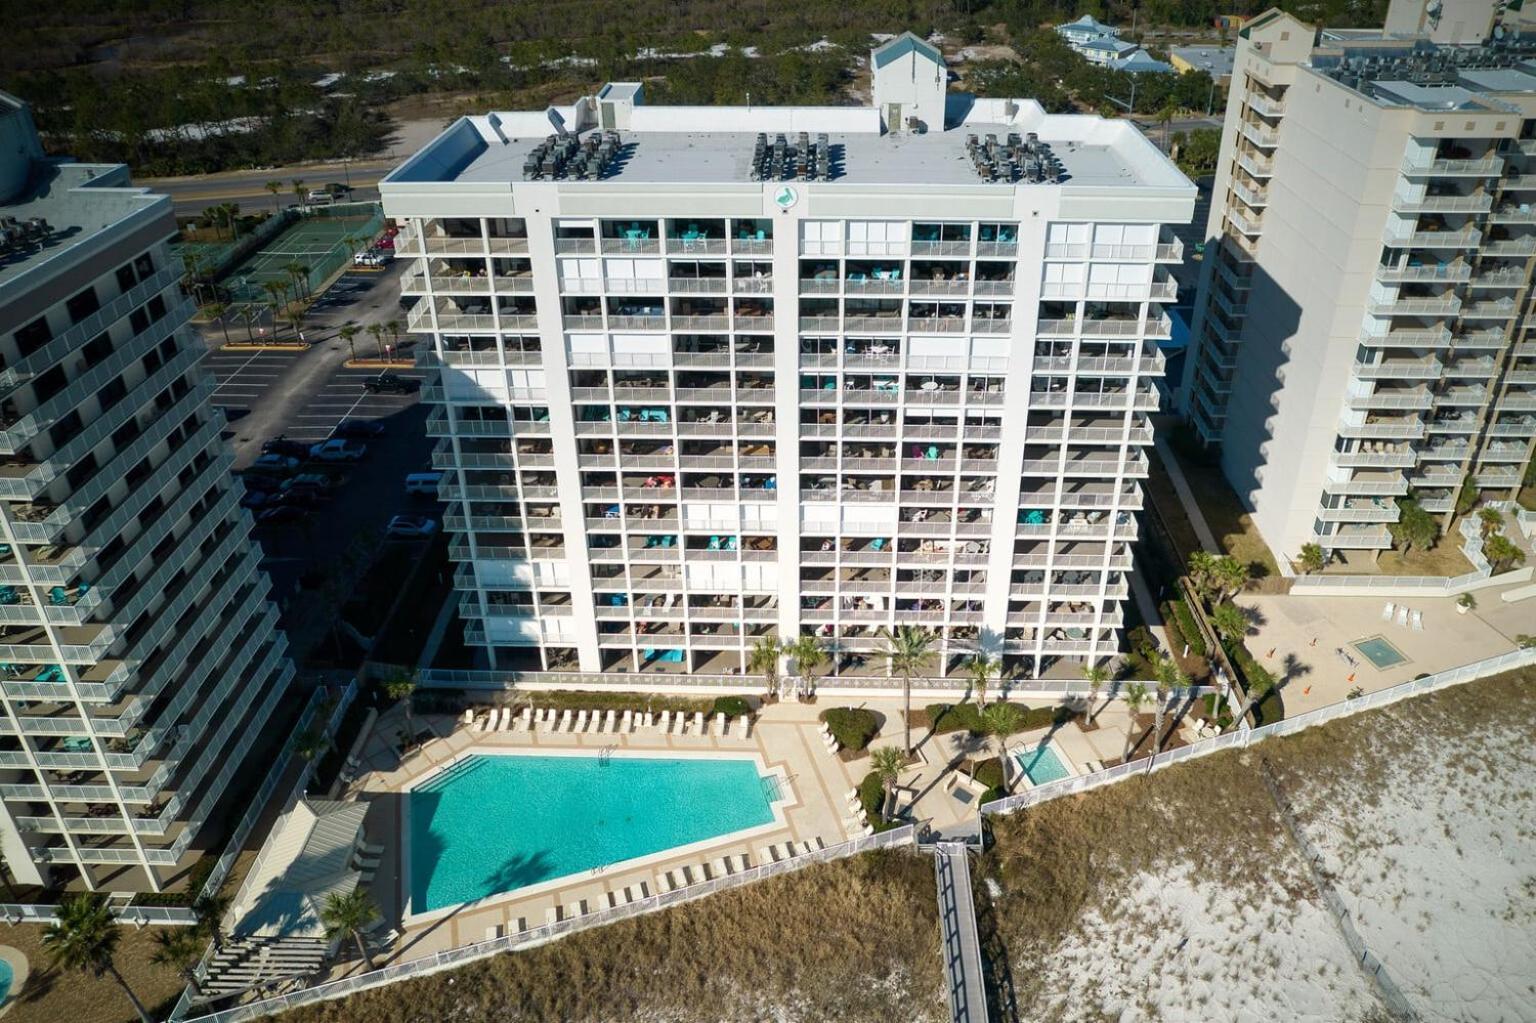 Pelican Pointe 1505 By Vacation Homes Collection Orange Beach Exterior photo